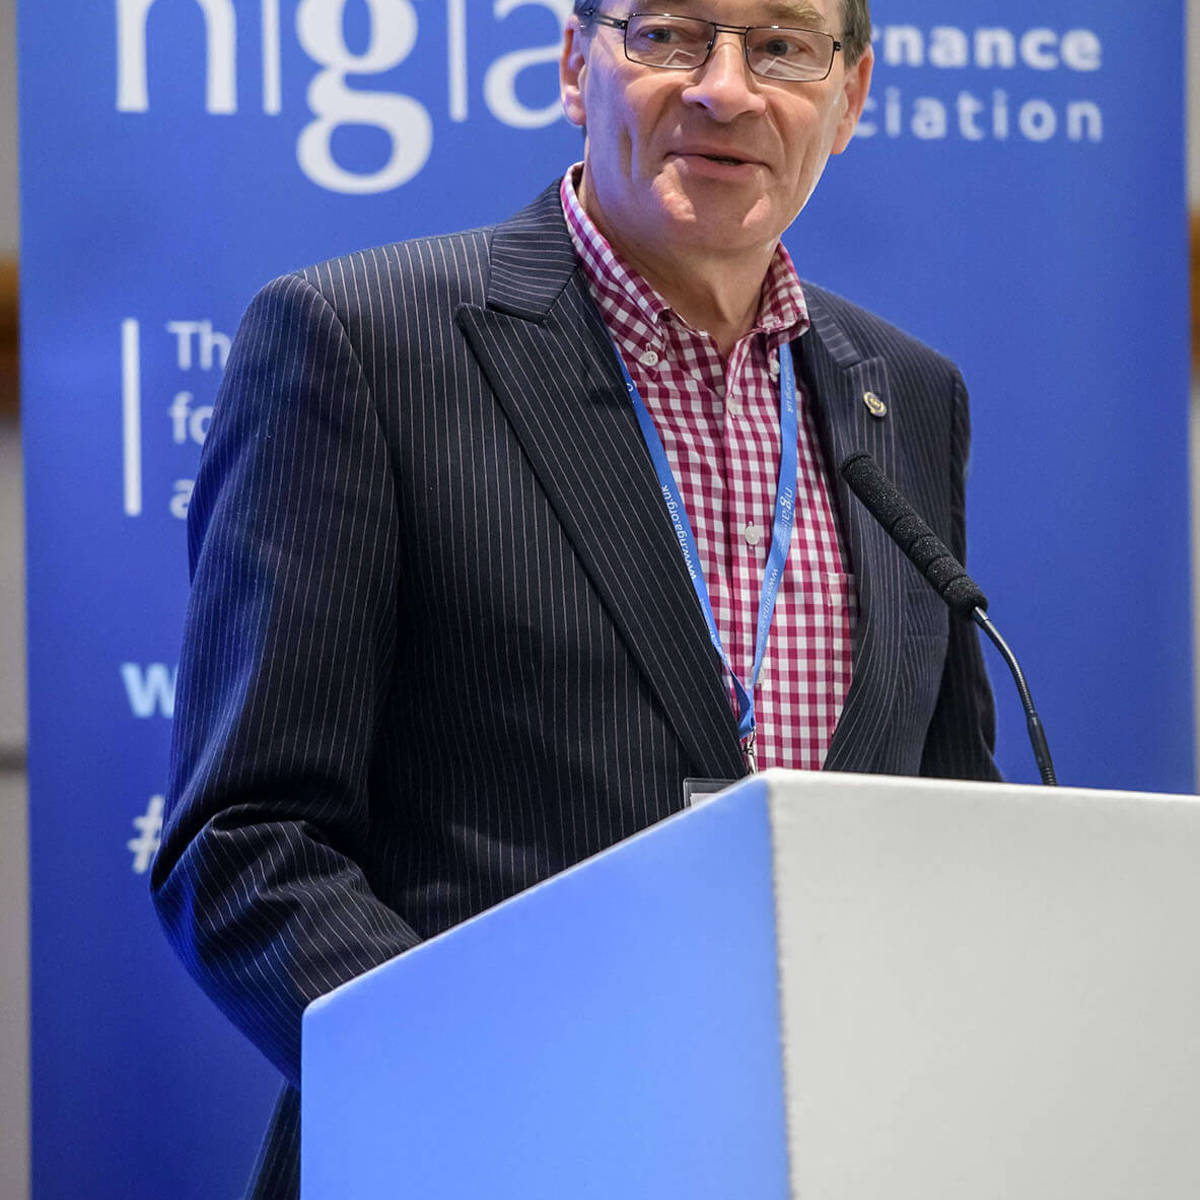 NGA representative speaking on the stand at a conference event